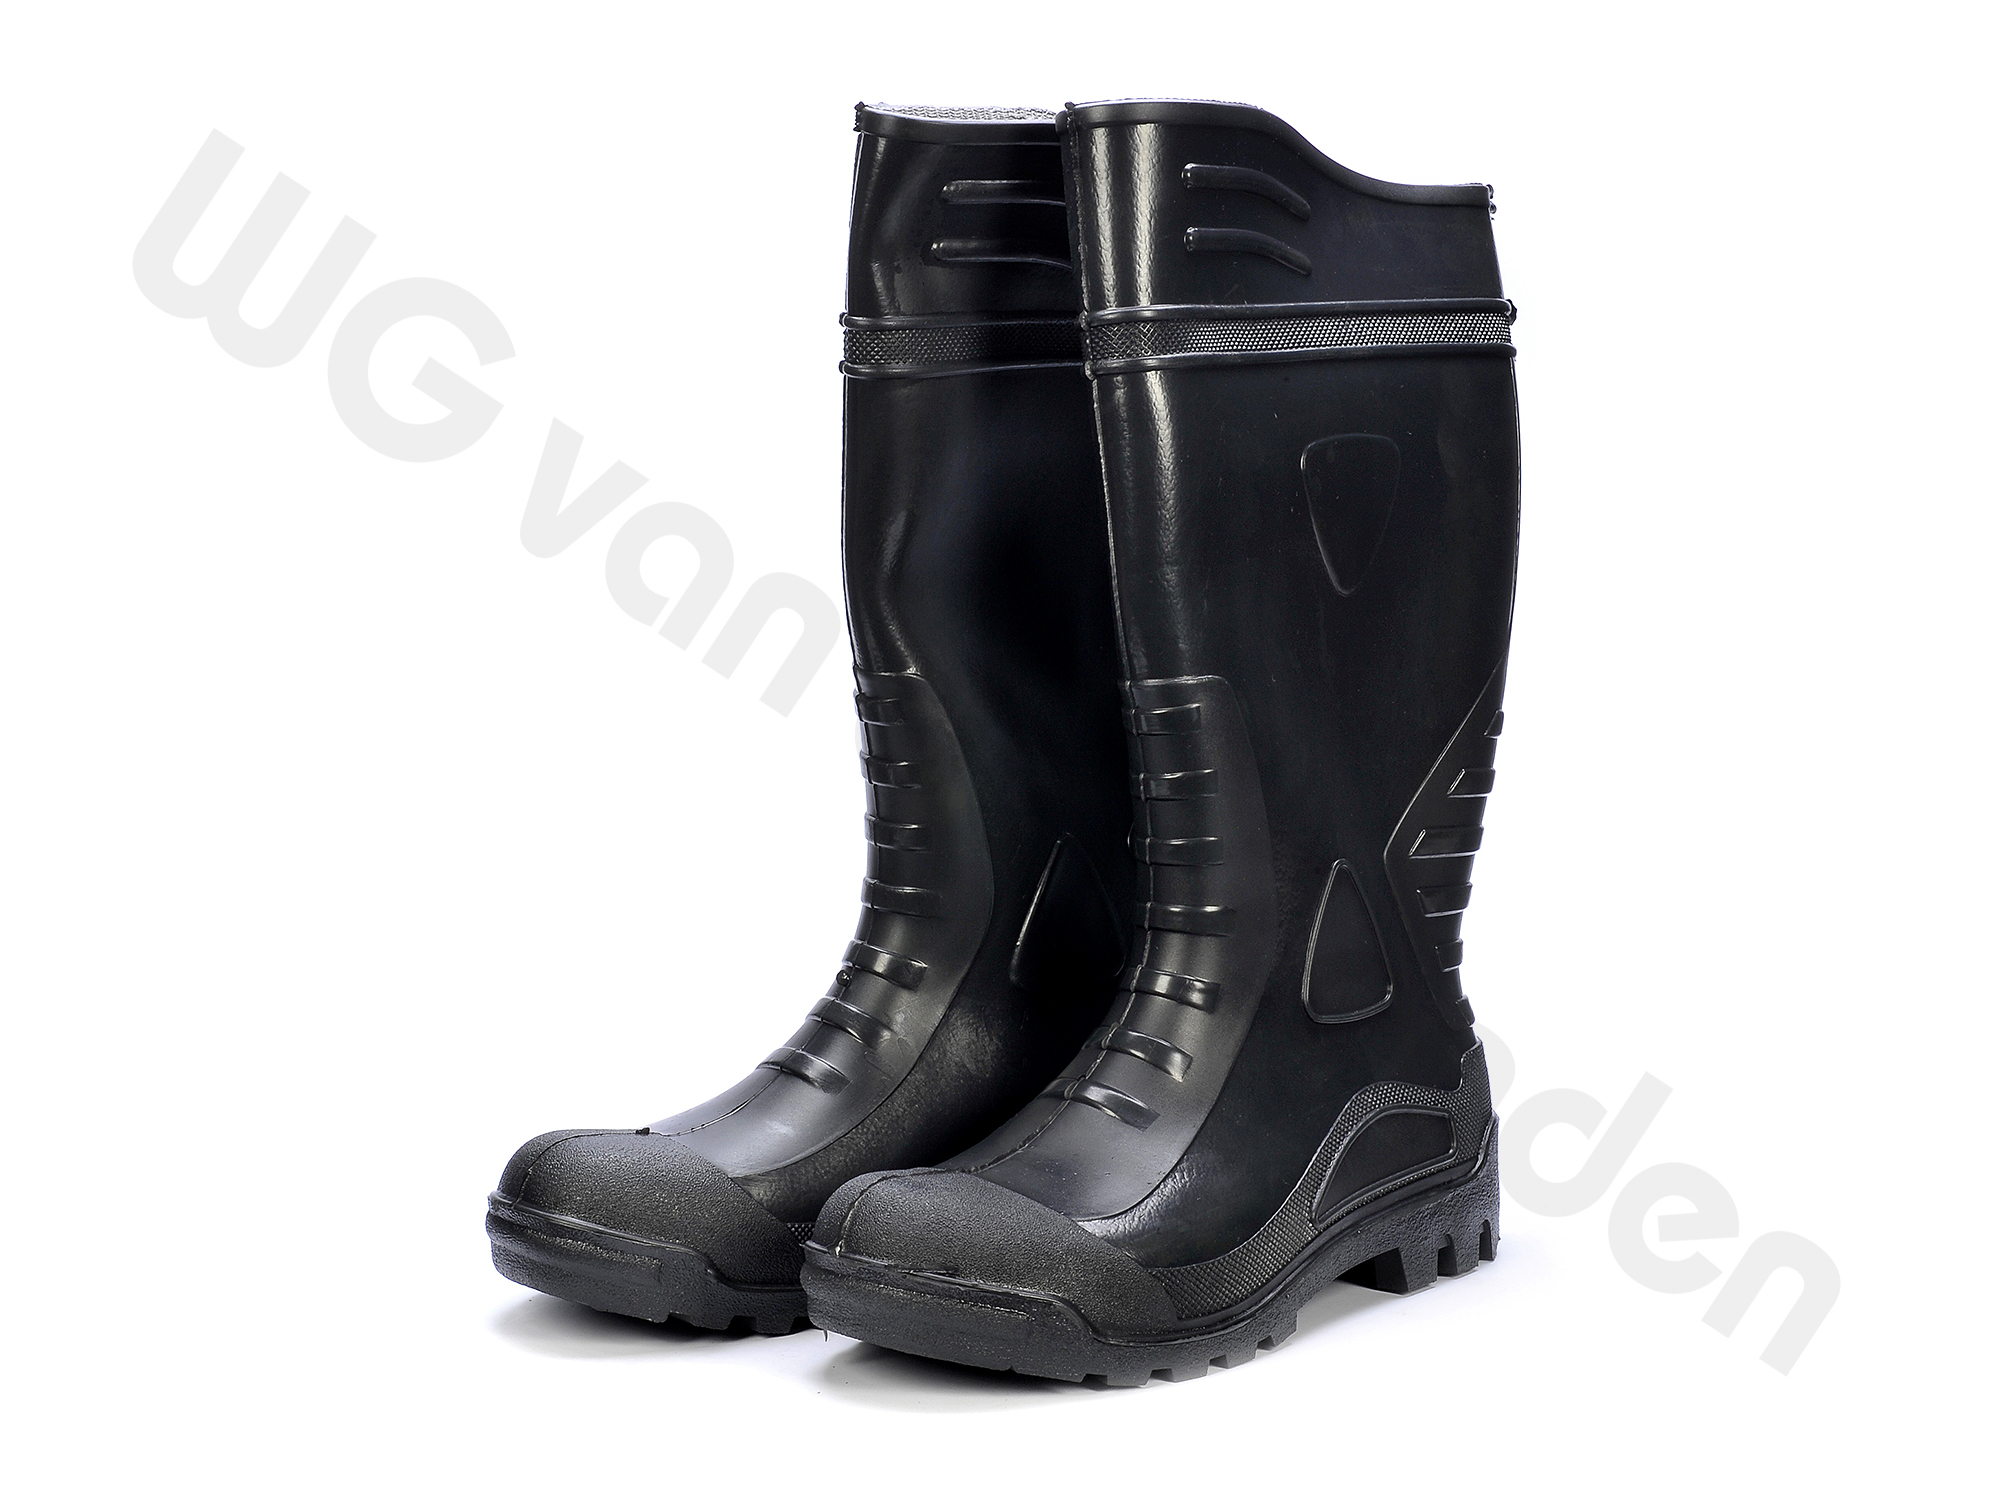 880200 BOOTS SAFETY S4 PVC WITH STEEL TOE SIZE 37/24.5CM CE